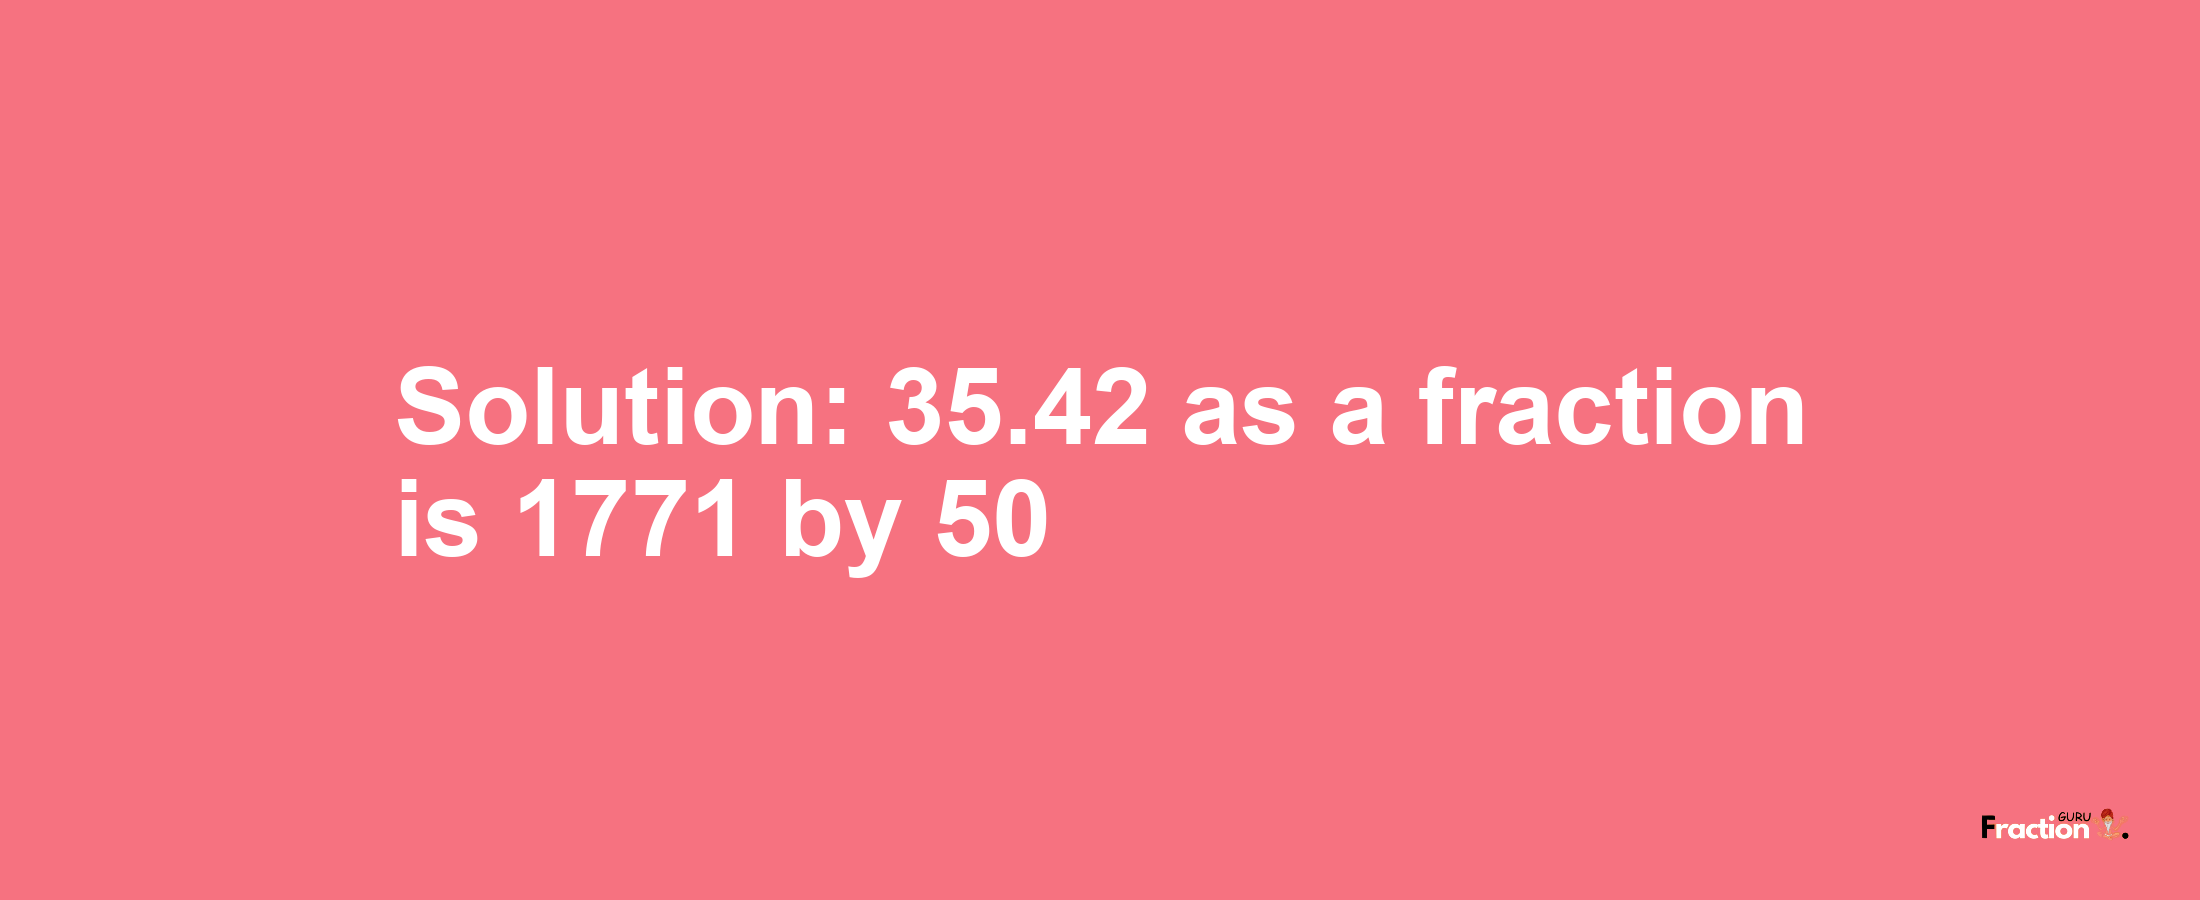 Solution:35.42 as a fraction is 1771/50